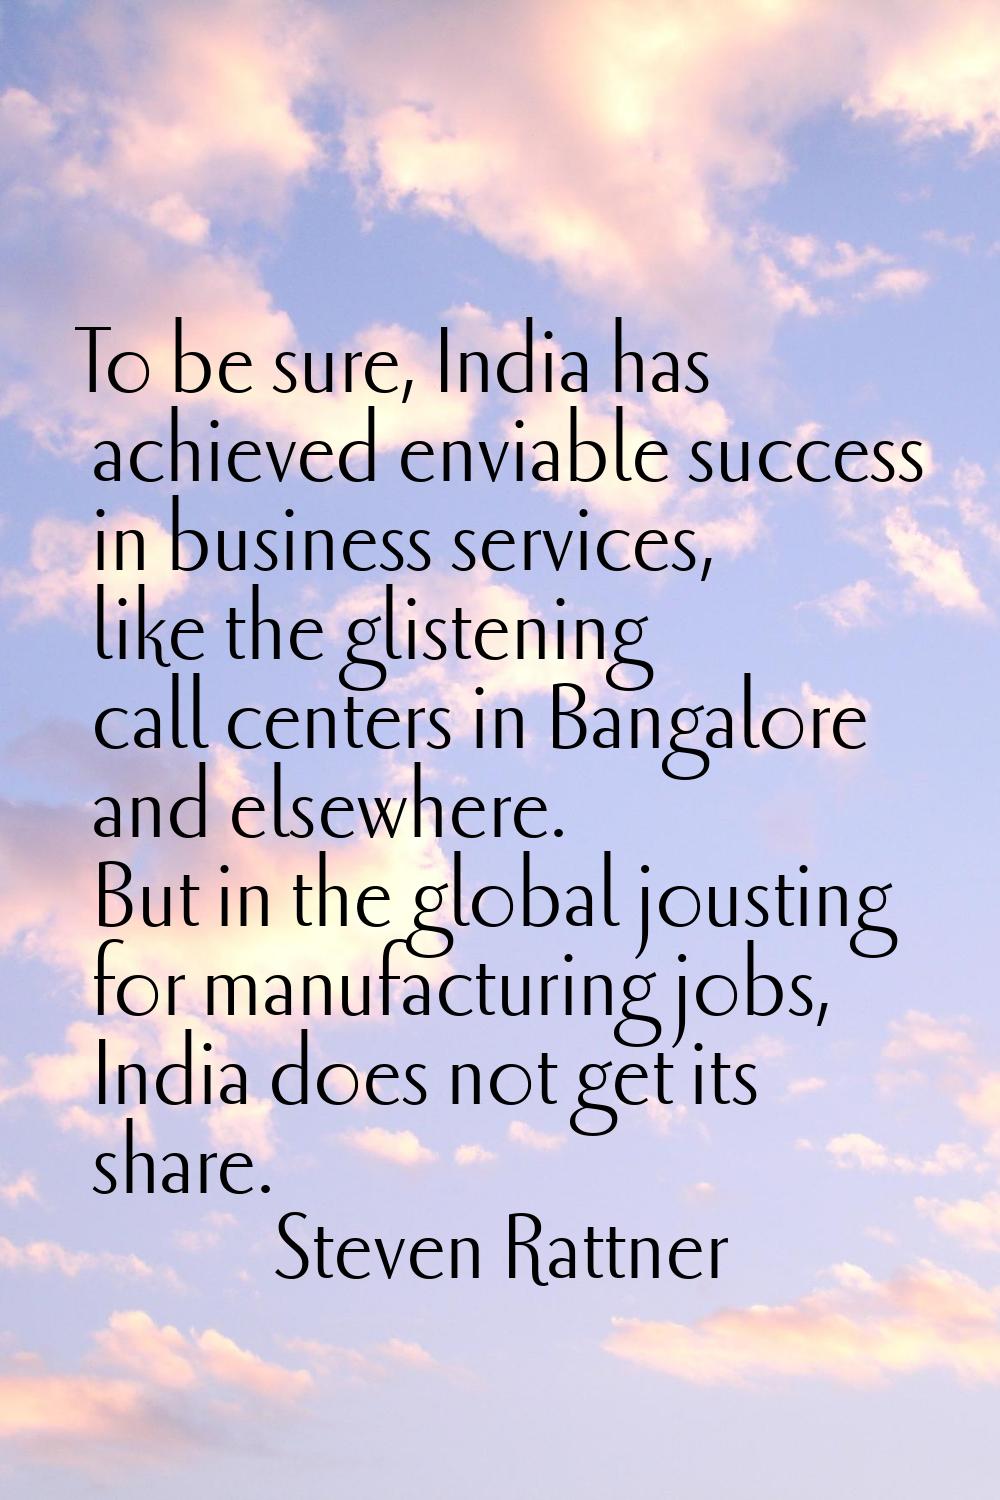 To be sure, India has achieved enviable success in business services, like the glistening call cent